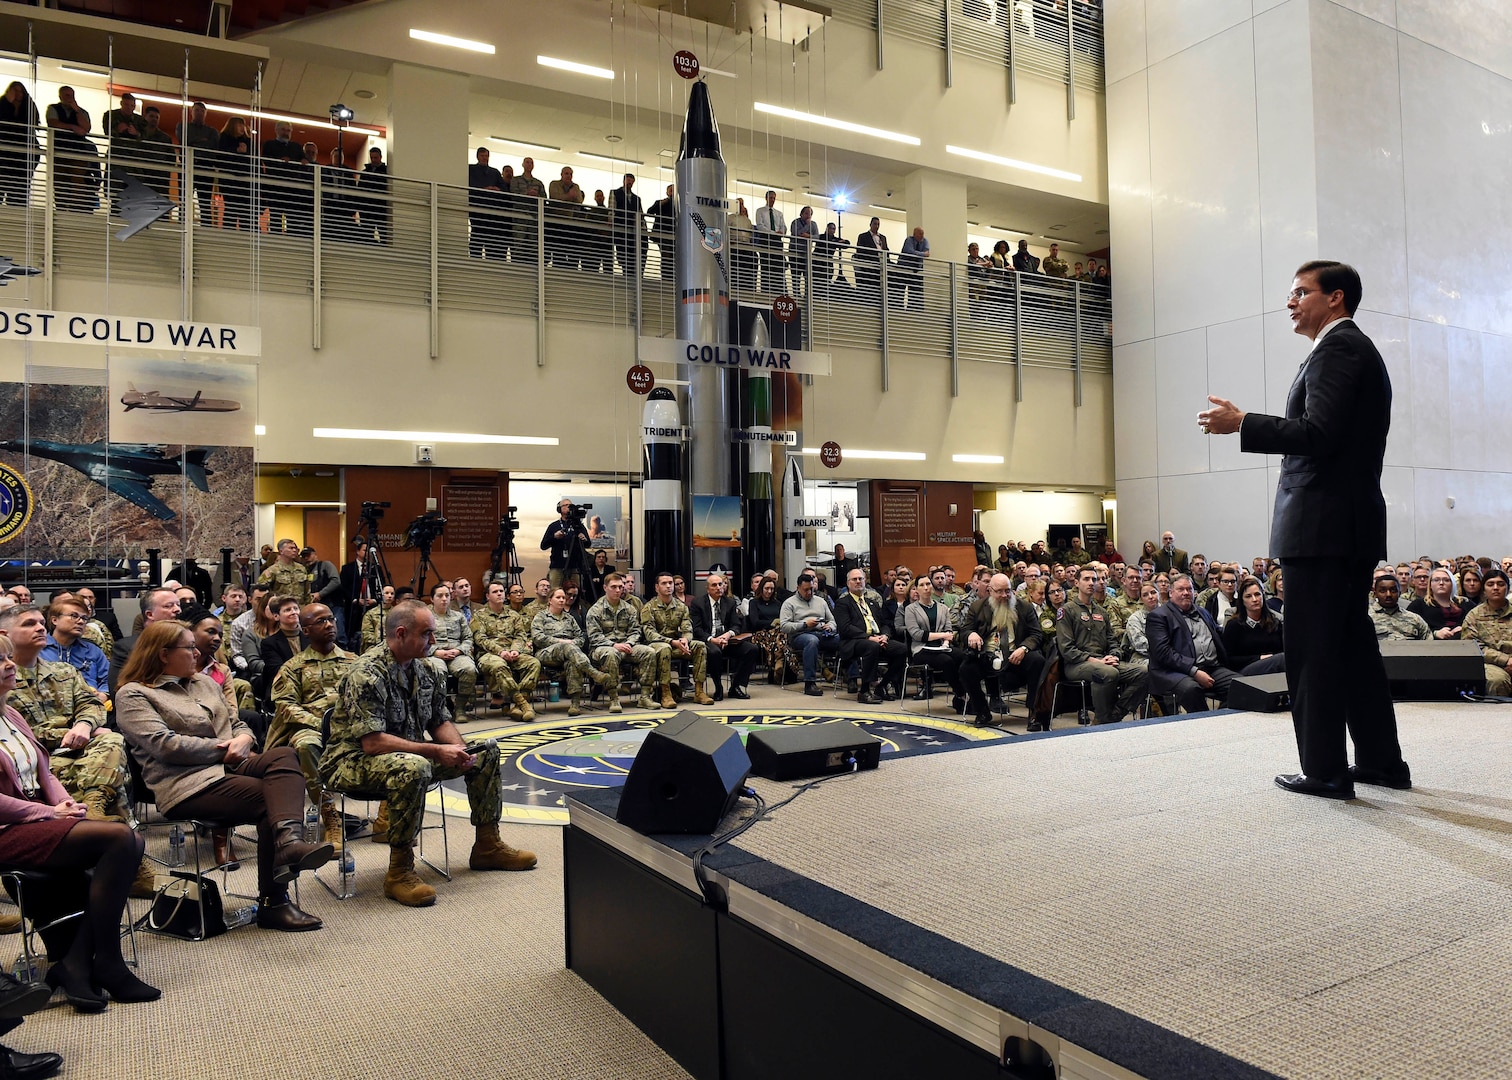 Secretary of Defense Dr. Mark T. Esper speaks to soldiers, sailors, airmen, Marines, civilians and spouses assigned to Offutt Air Force Base, Neb., during a town hall meeting at the U.S. Strategic Command (USSTRATCOM) Command and Control Facility, Feb. 20, 2020. During the event, Secretary Esper thanked USSTRATCOM, 55th Wing, tenant units, and their families for their service, and took their questions about a variety of topics on their minds, from the mission to supporting their families.